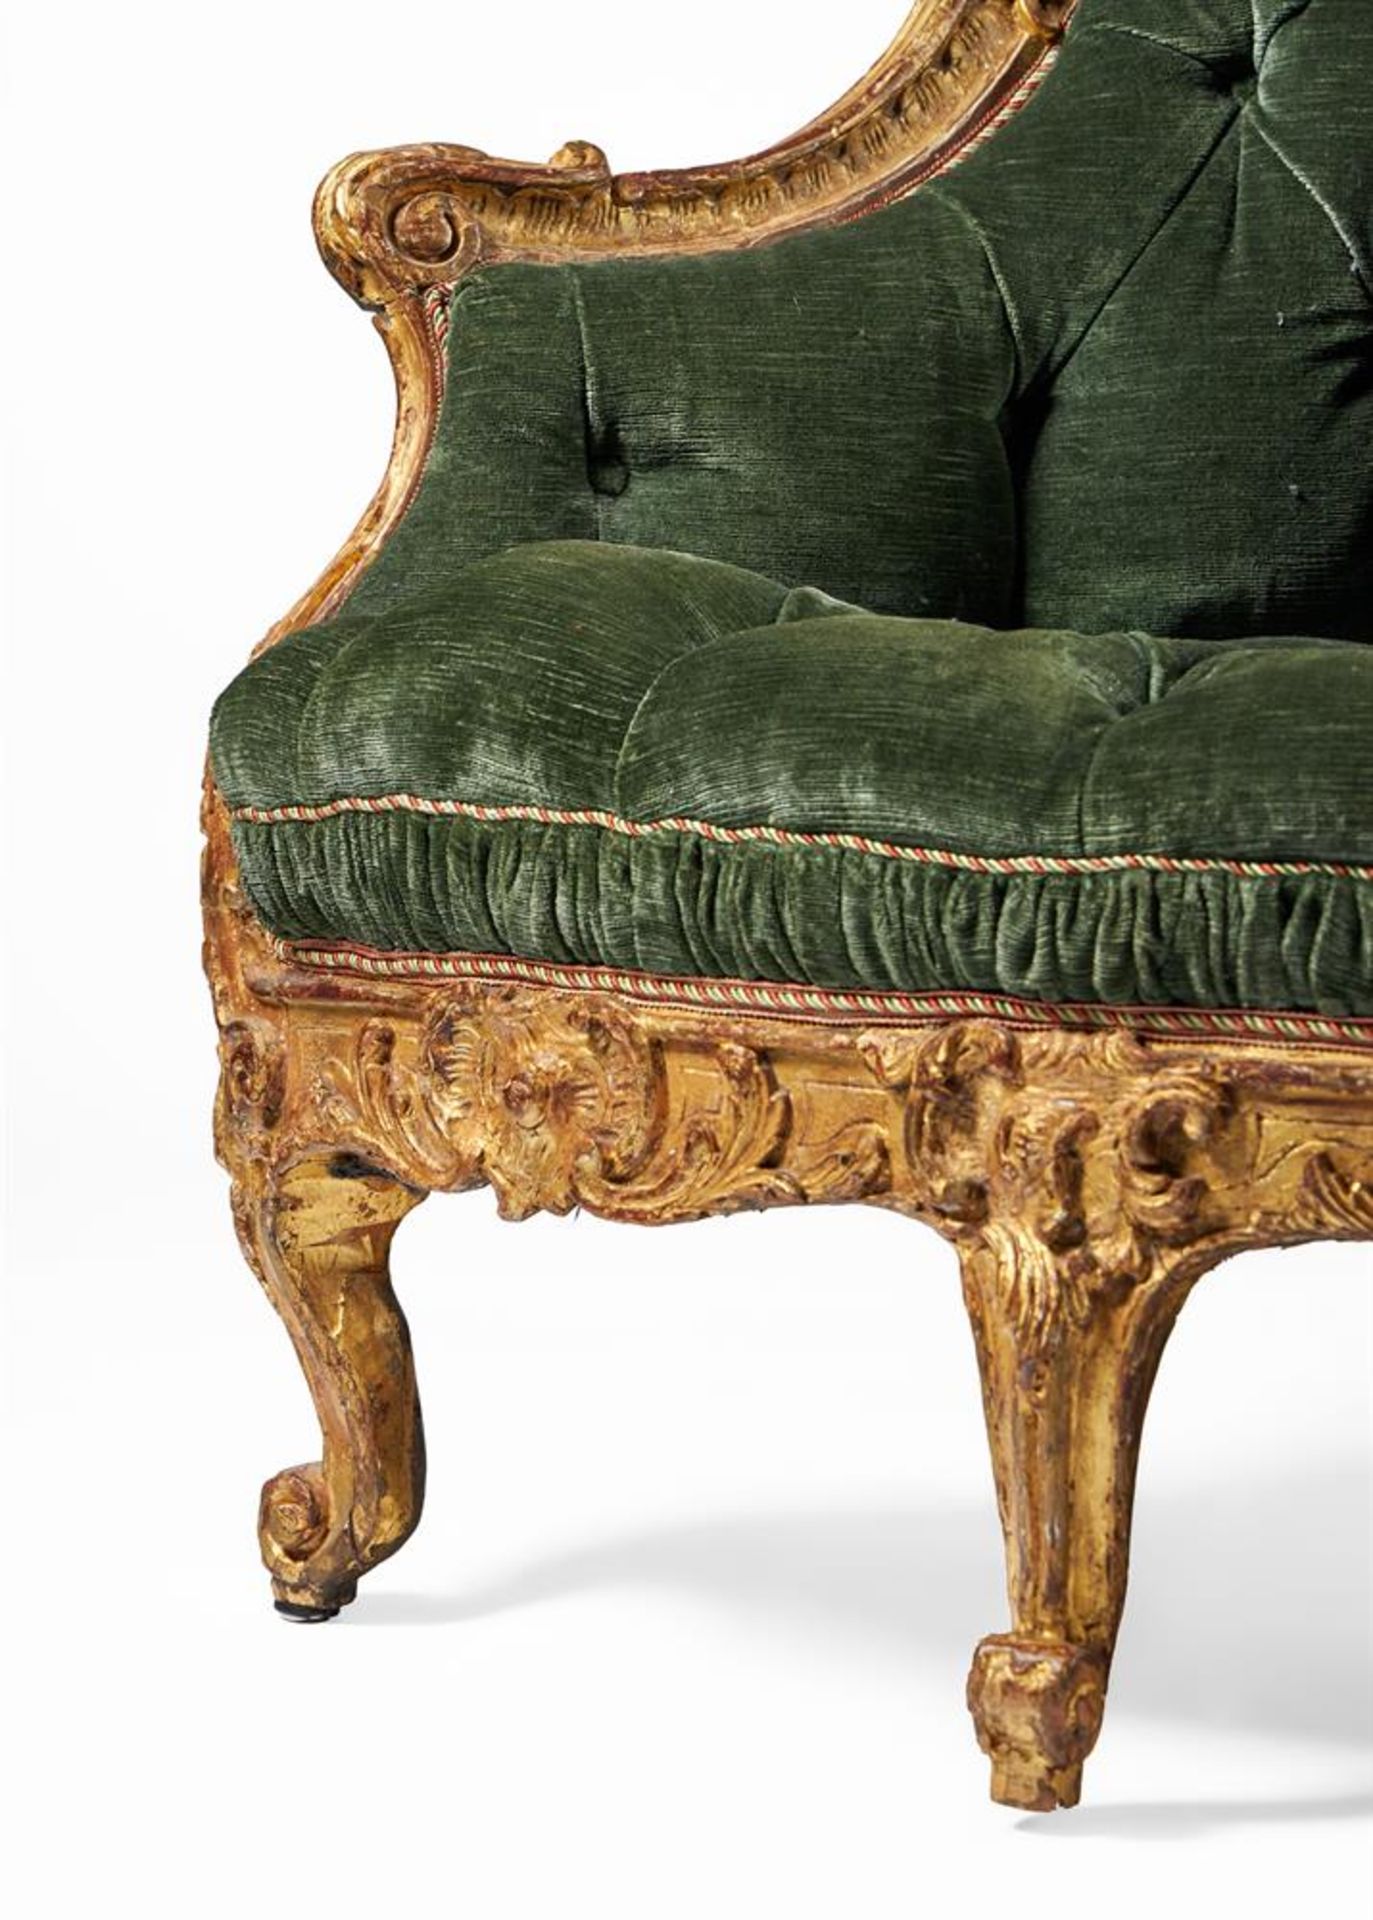 A LARGE CONTINENTAL CARVED GILTWOOD SOFA OR CANAPE A CONFIDENTS, MID 18TH CENTURY - Image 9 of 9